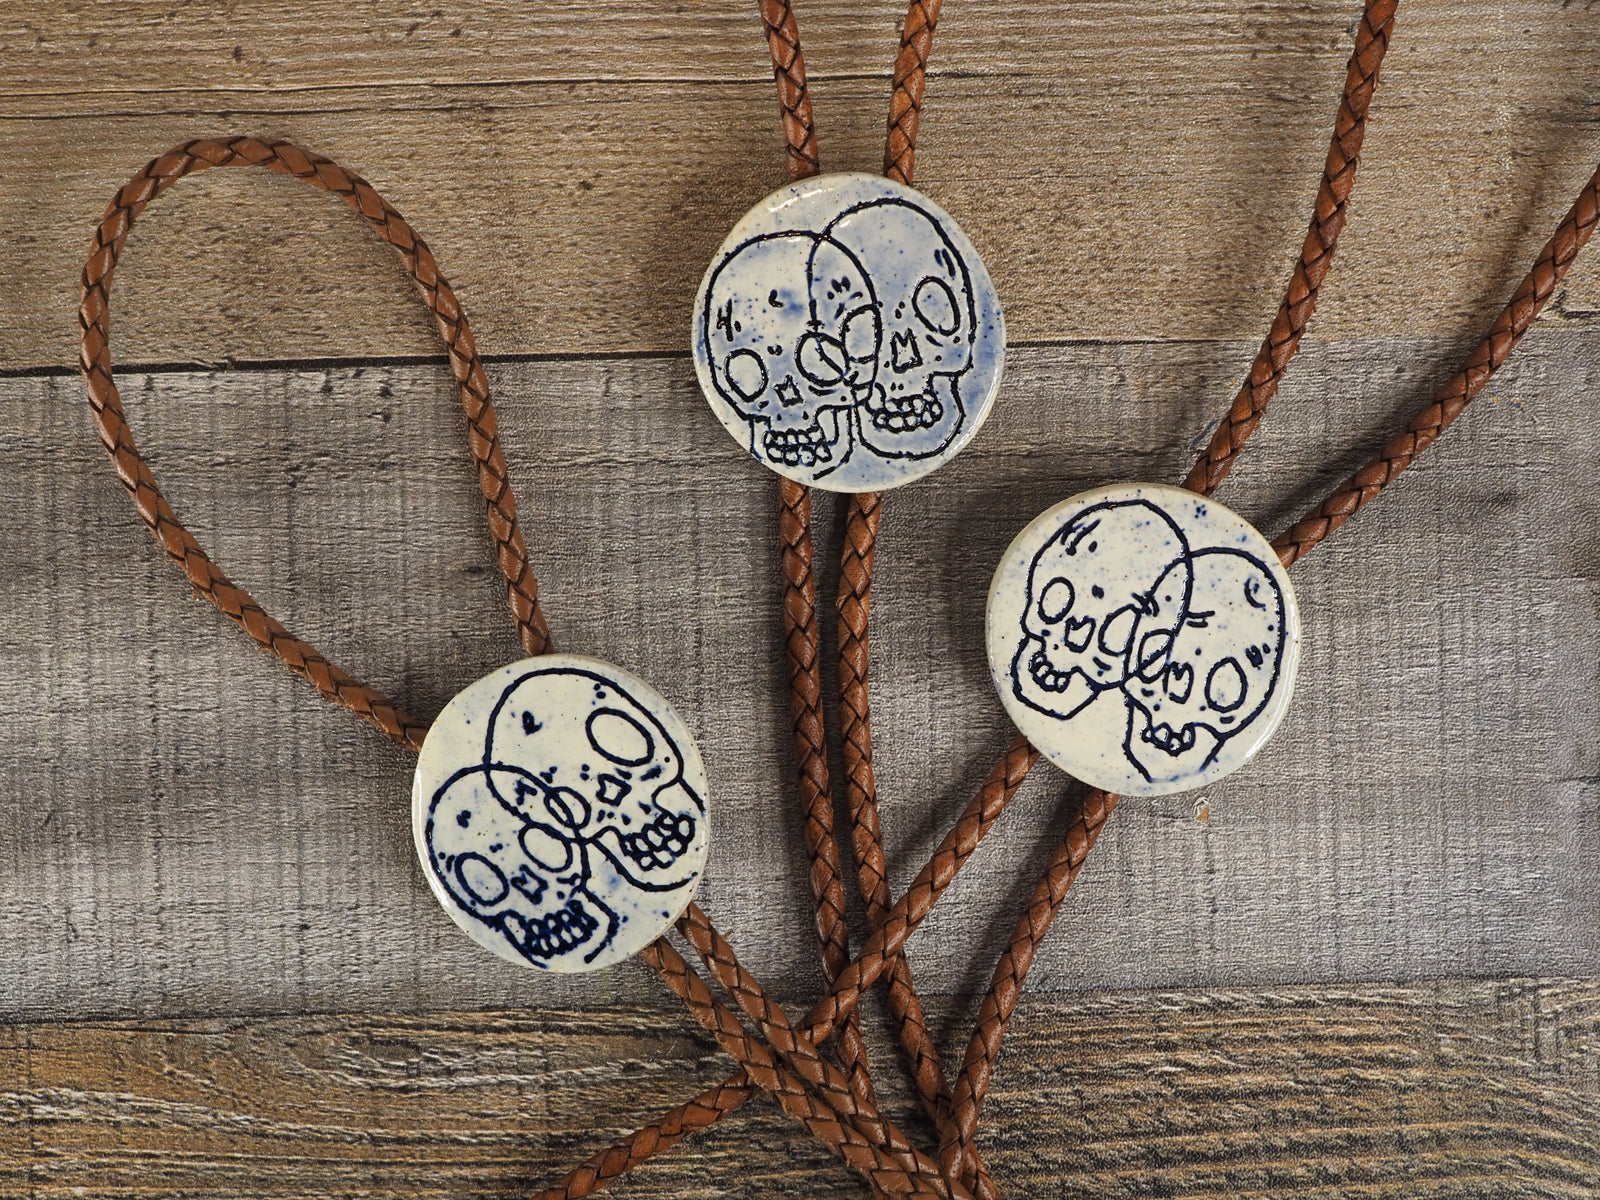 Skull illustration is carved and hand-painted onto white stoneware pendant with cobalt blue inlay, bolo tie hung on leather cords - 3 are shown together